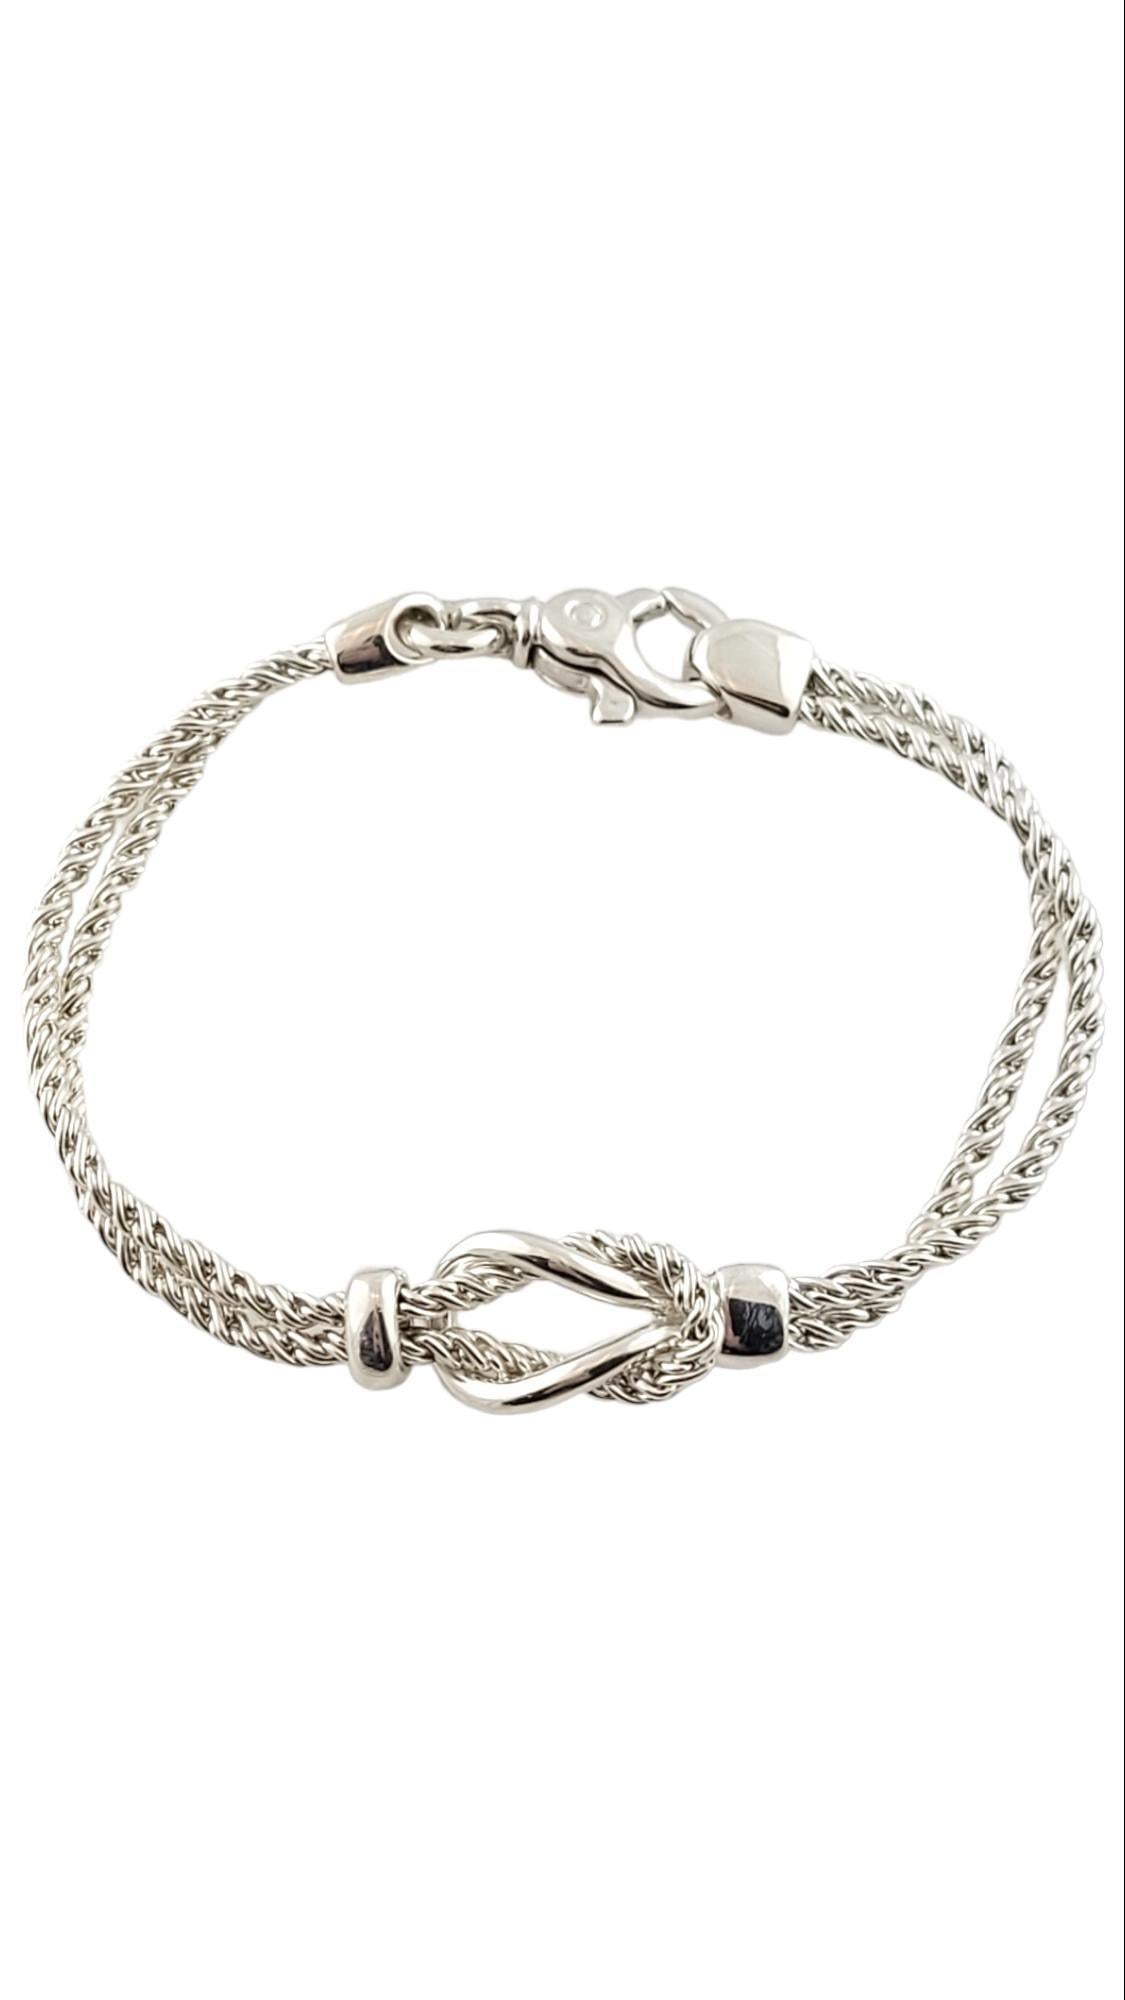 Vintage Tiffany & Co Sterling Silver Double Rope Love Knot Bracelet w/ Tiffany Box

This gorgeous Tiffany & Co double rope bracelet was crafted from sterling silver with a beautiful love knot!

Size: 6.75